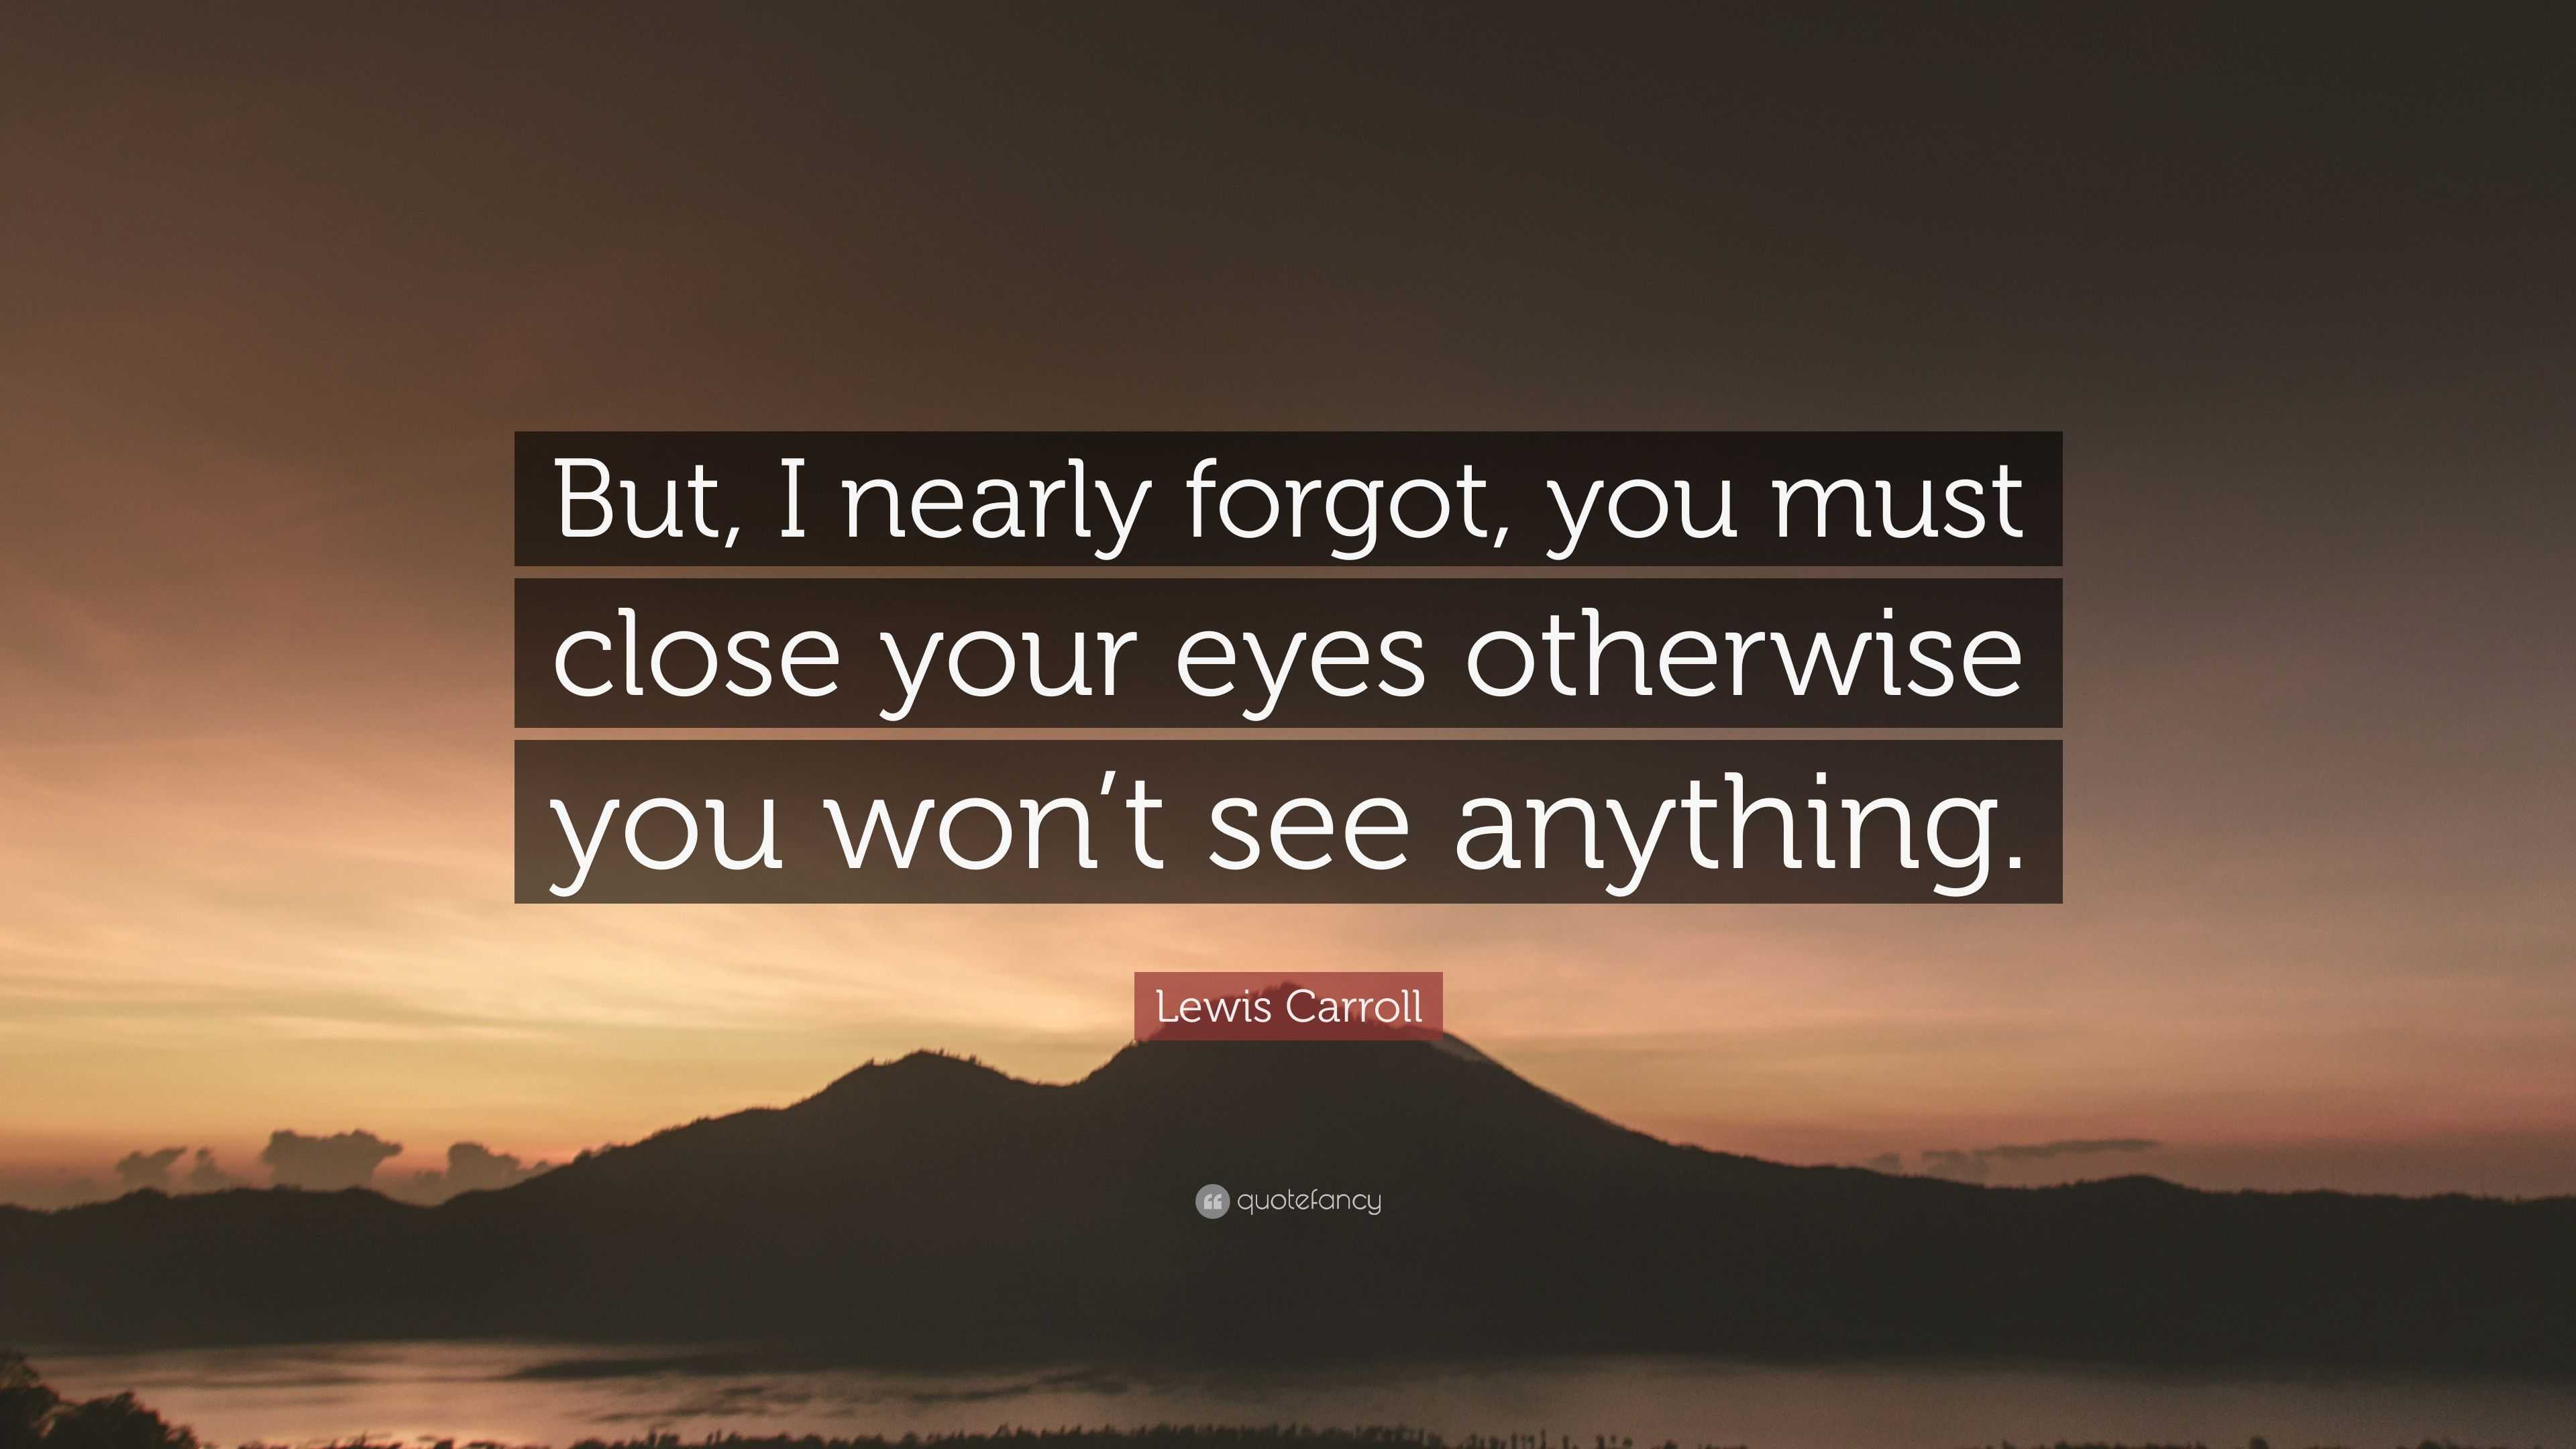 Lewis Carroll Quote: “But, I nearly forgot, you must close your eyes ...